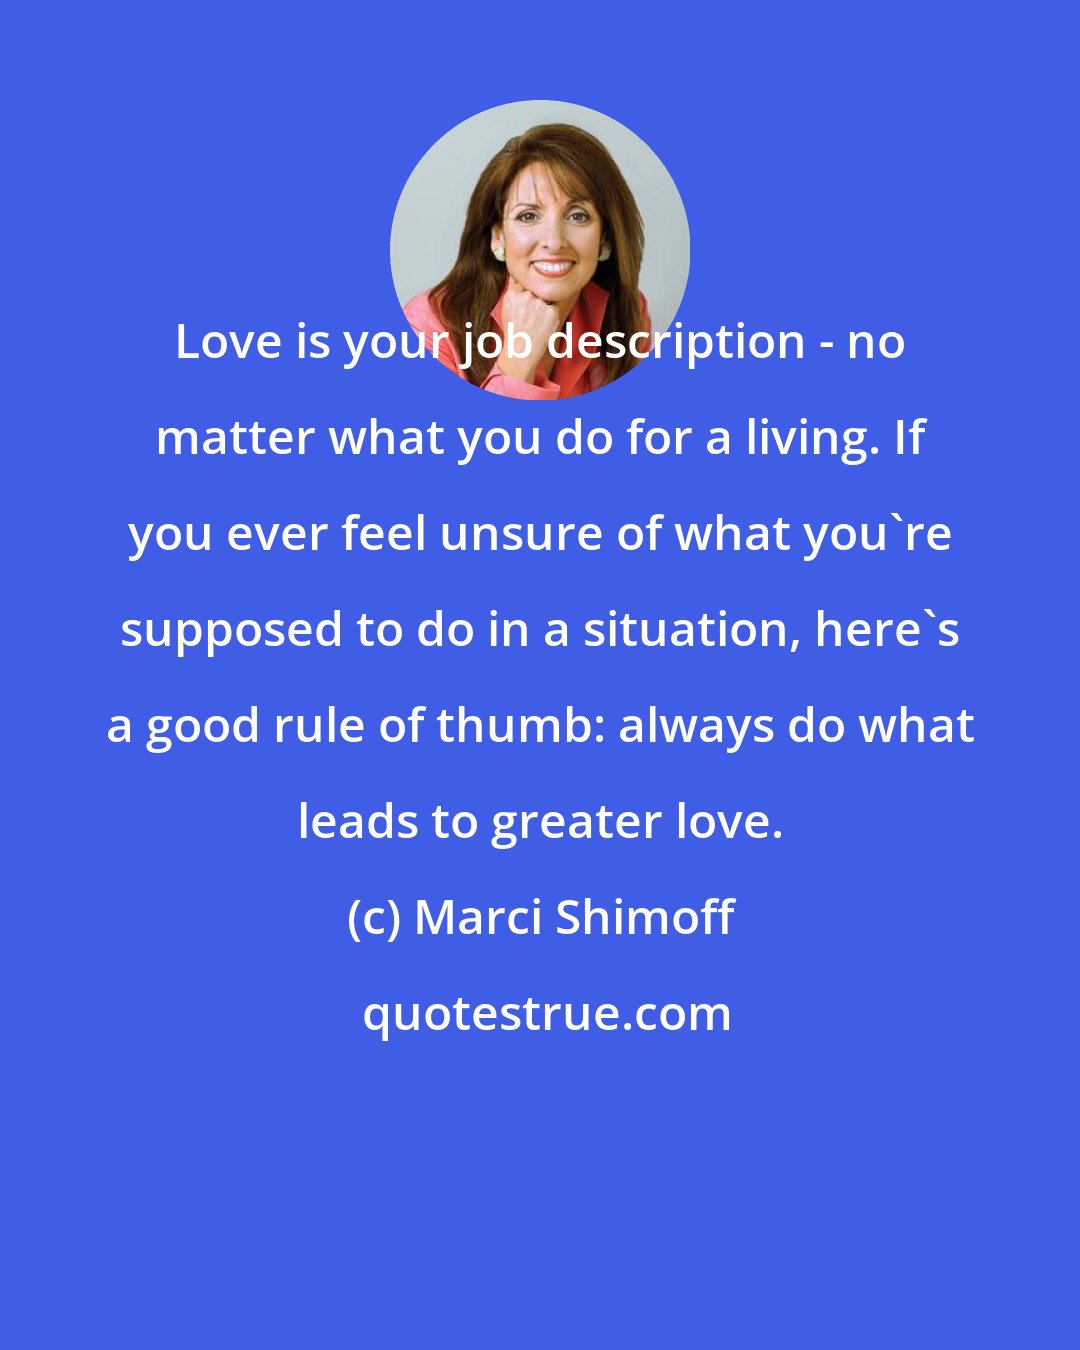 Marci Shimoff: Love is your job description - no matter what you do for a living. If you ever feel unsure of what you're supposed to do in a situation, here's a good rule of thumb: always do what leads to greater love.